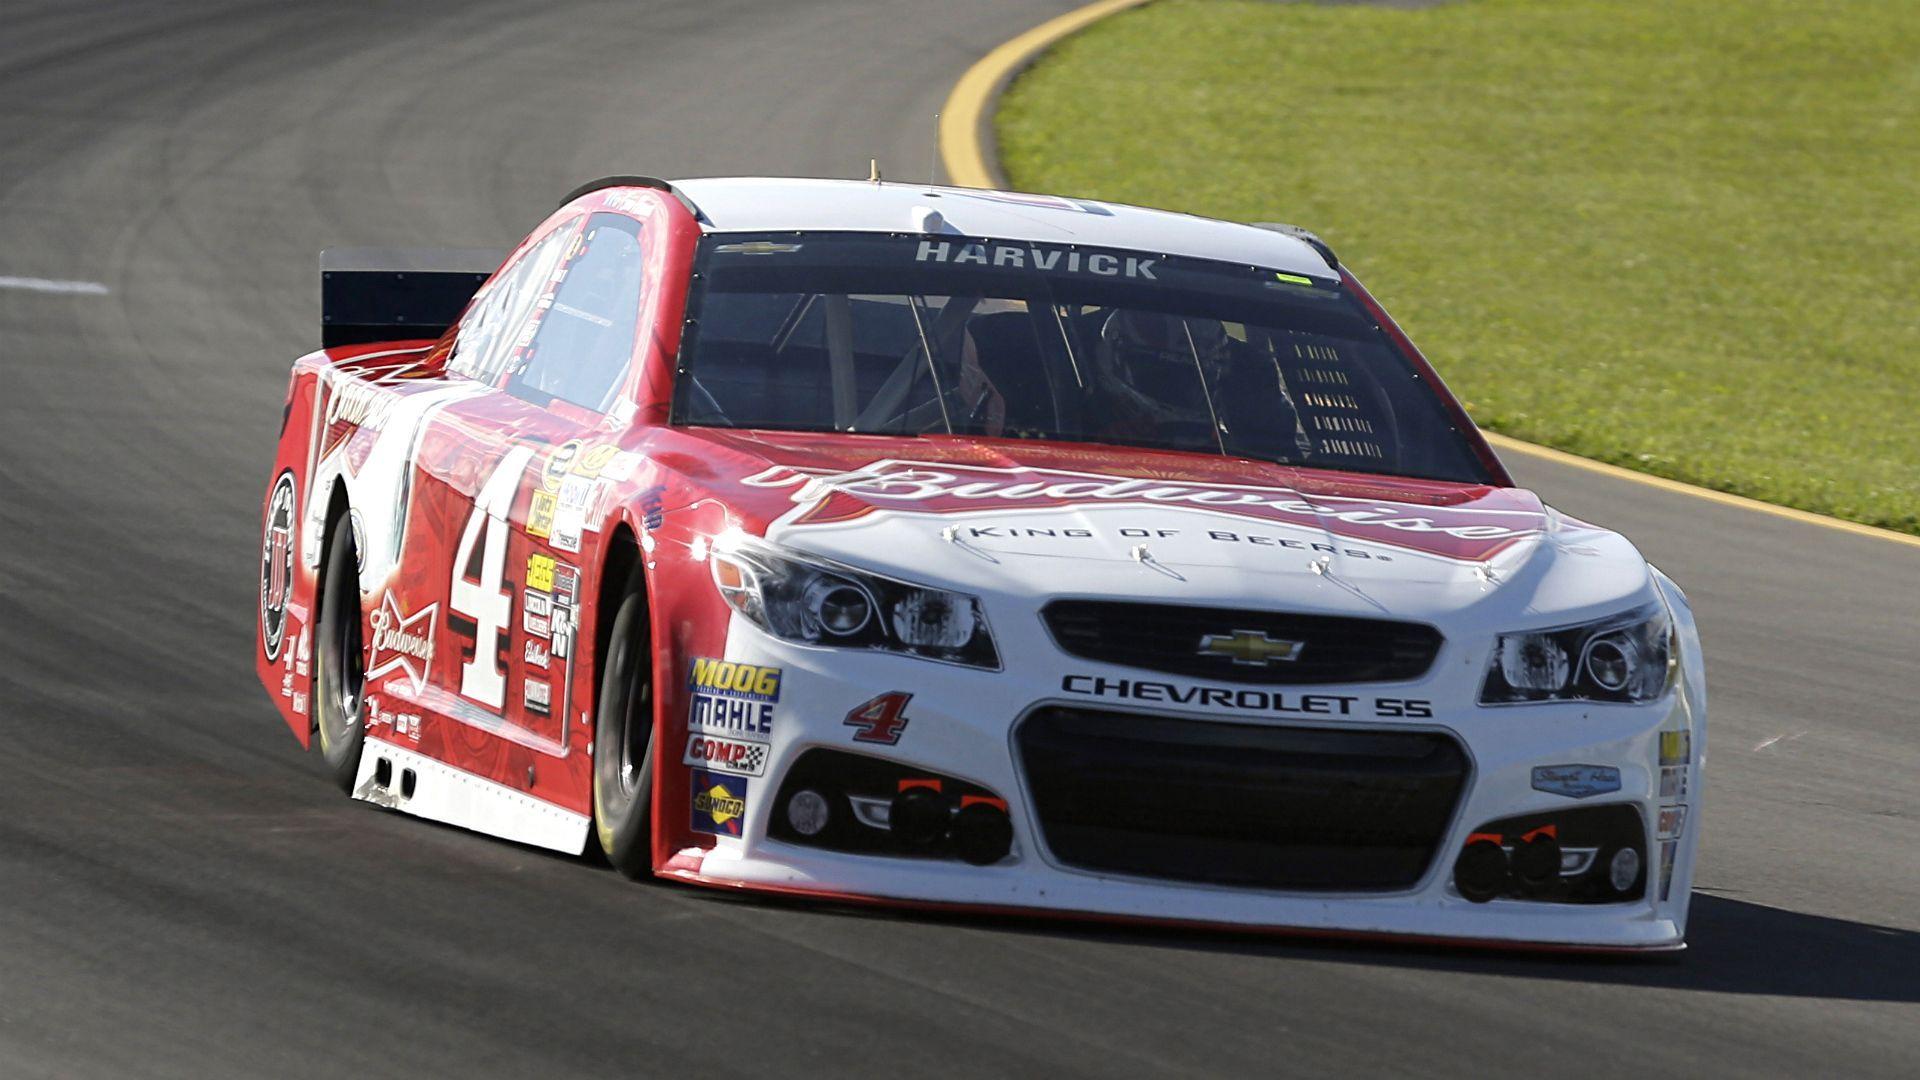 Kevin Harvick wins Michigan pole with fastest speed since 1987